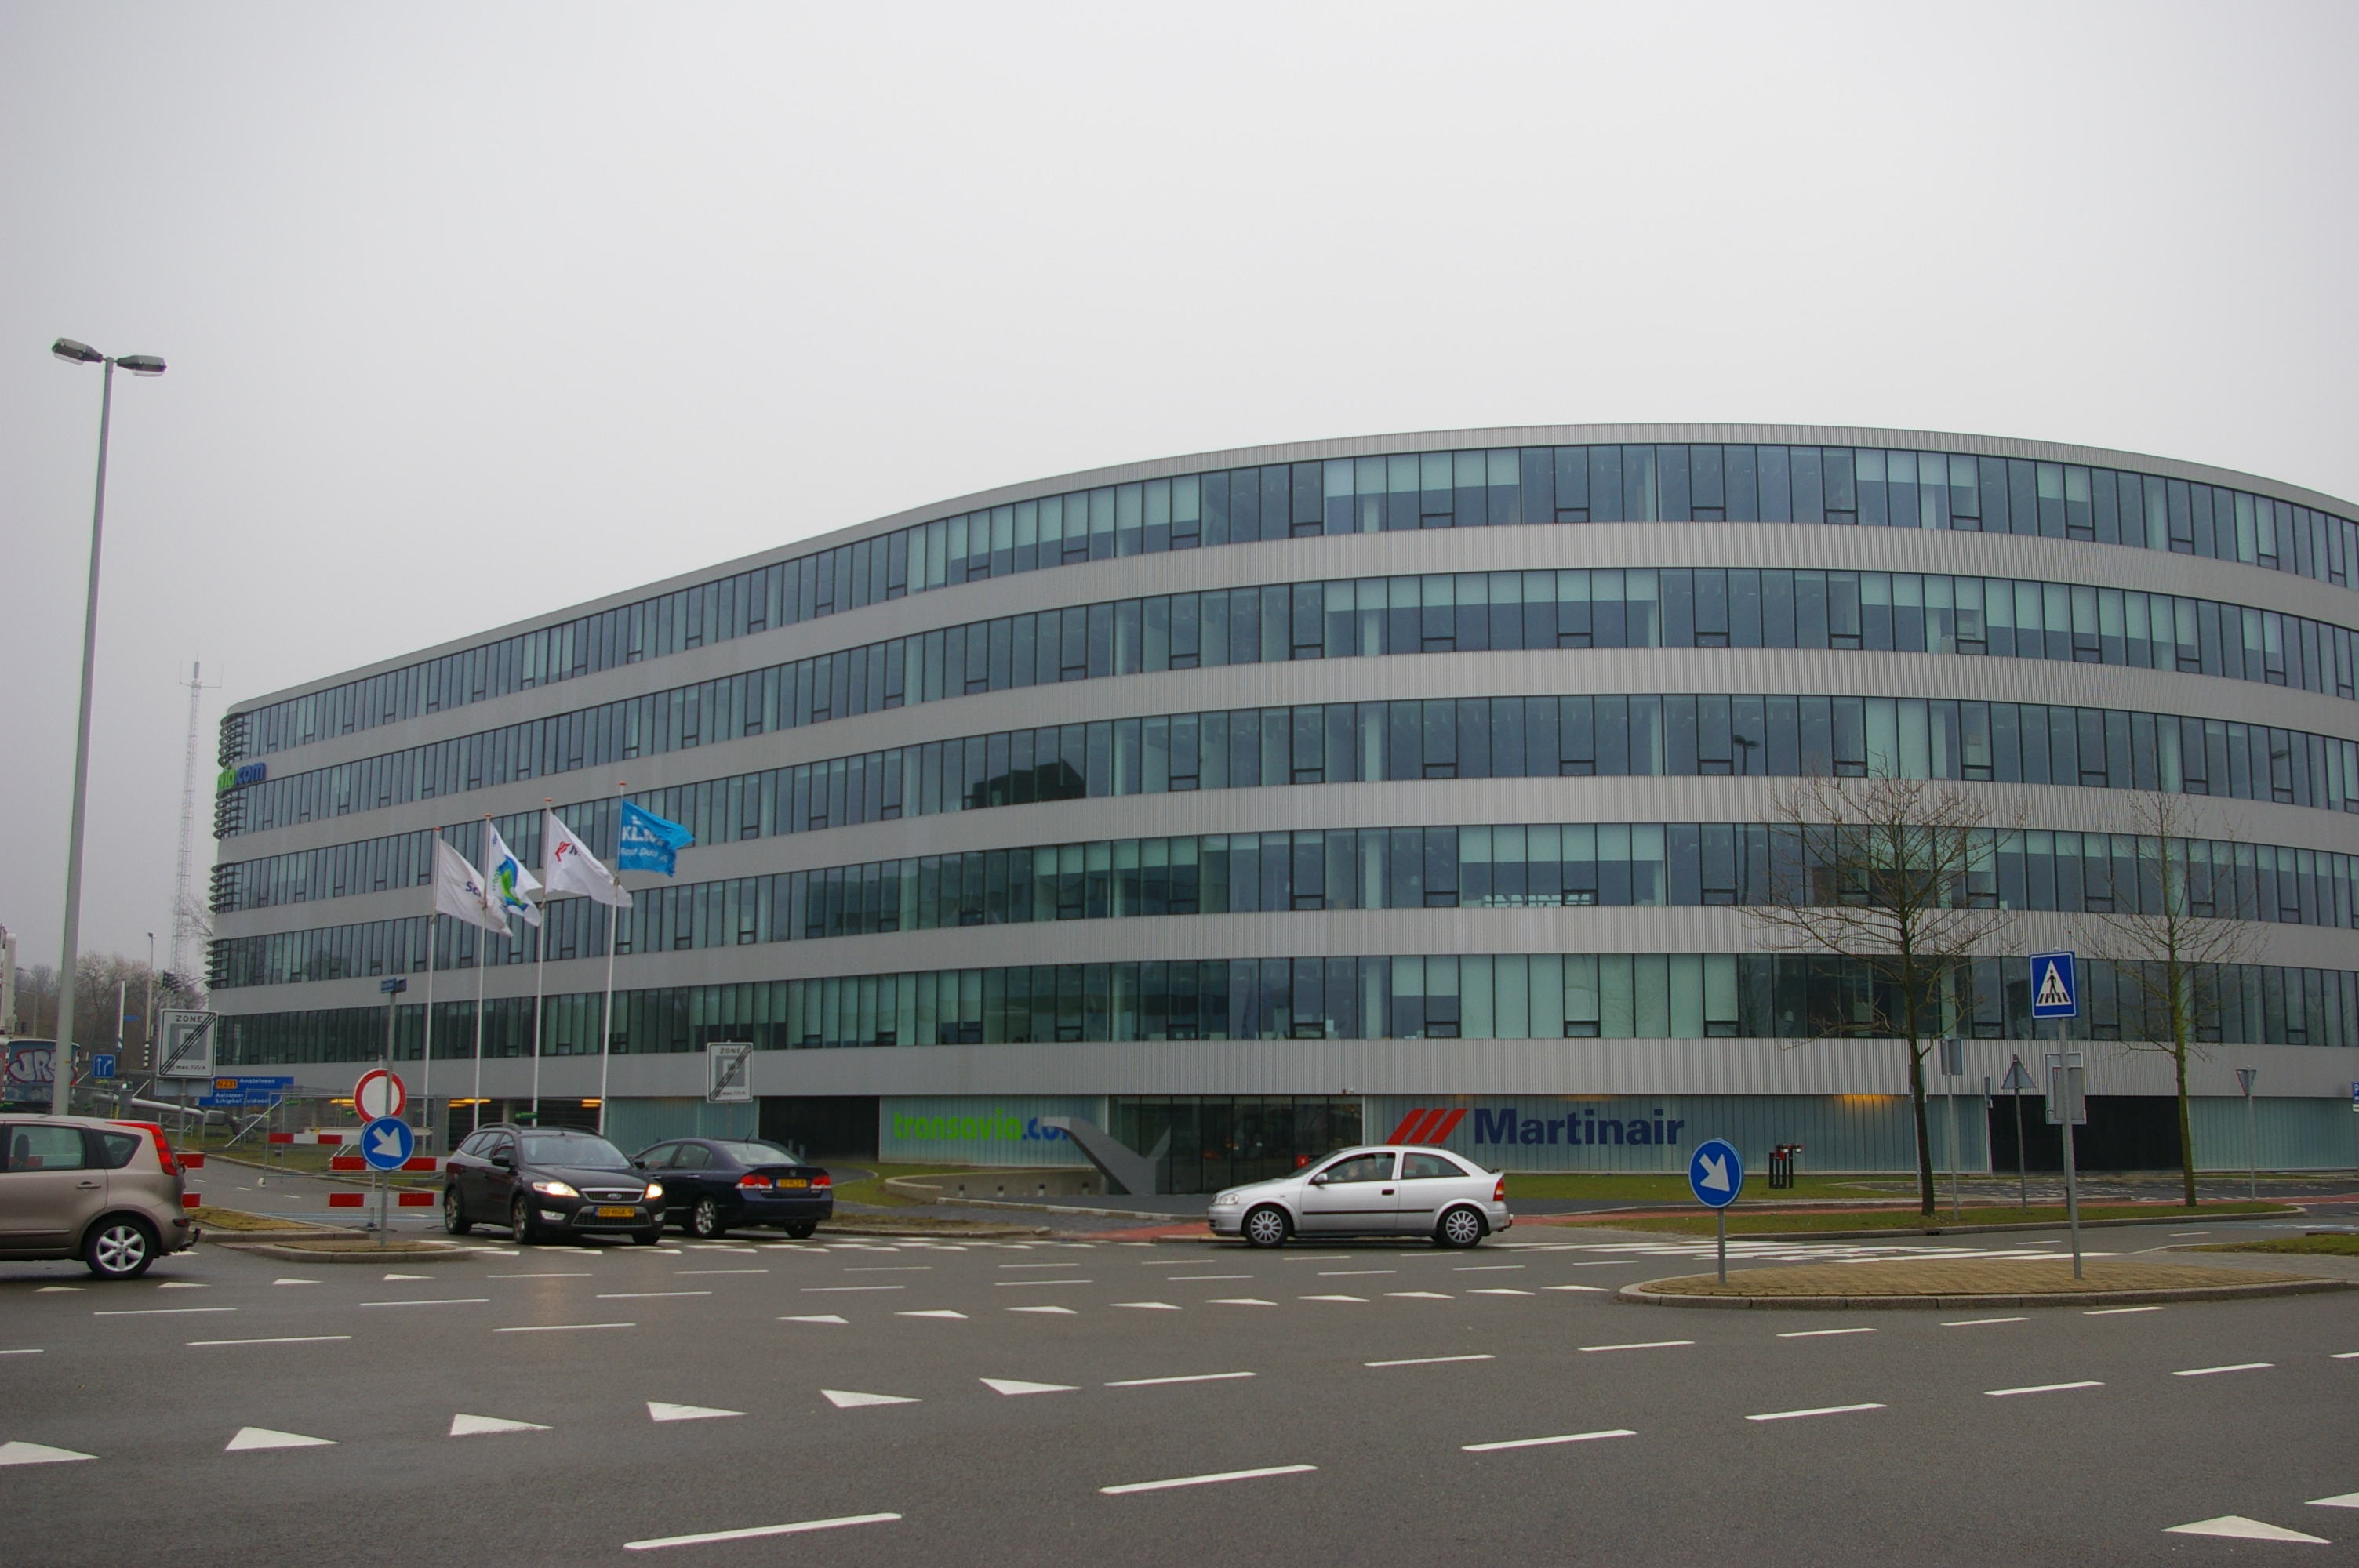 Martinair and Transavia offices Schiphol-Oost